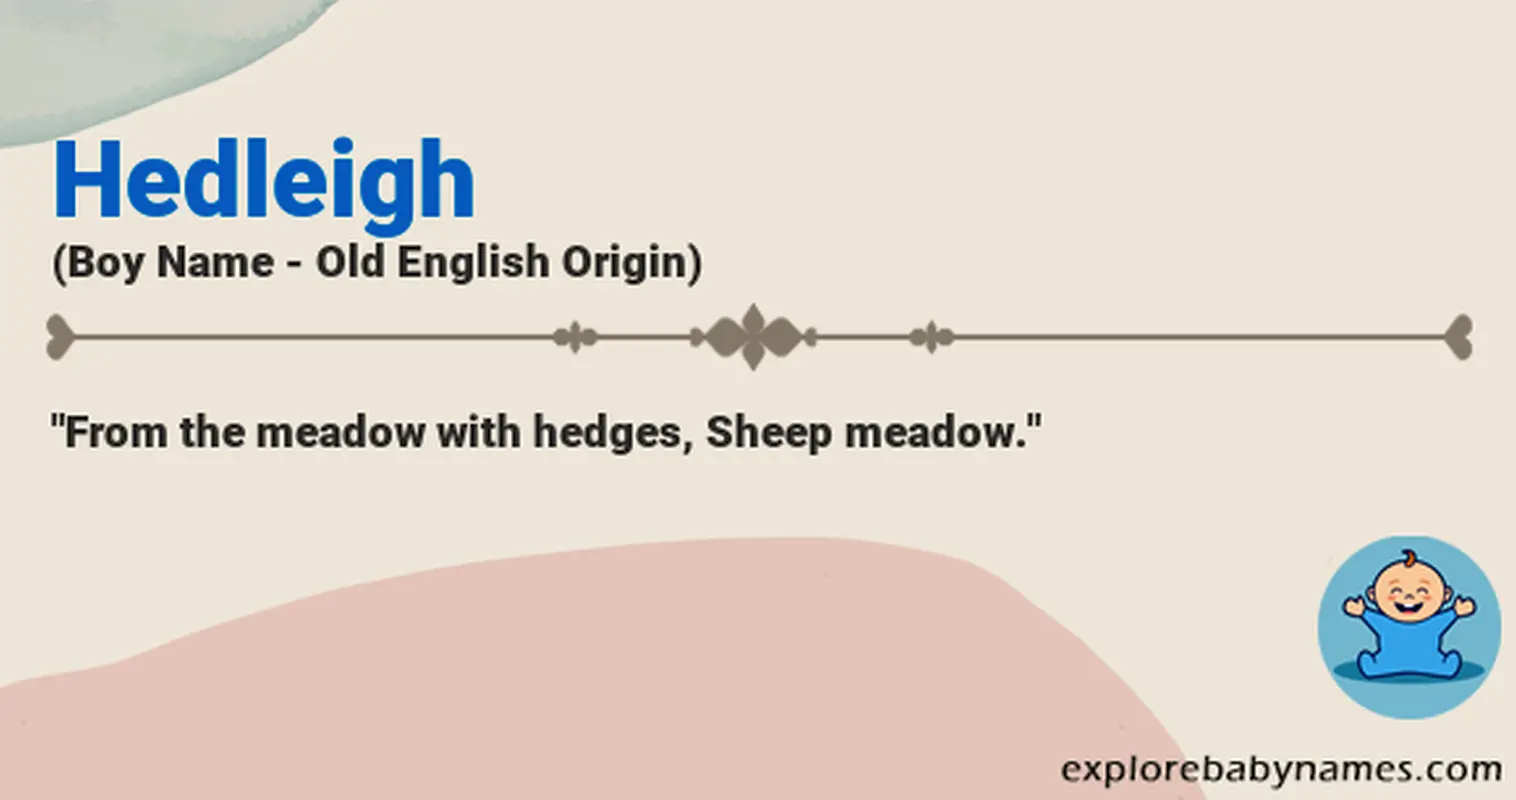 Meaning of Hedleigh